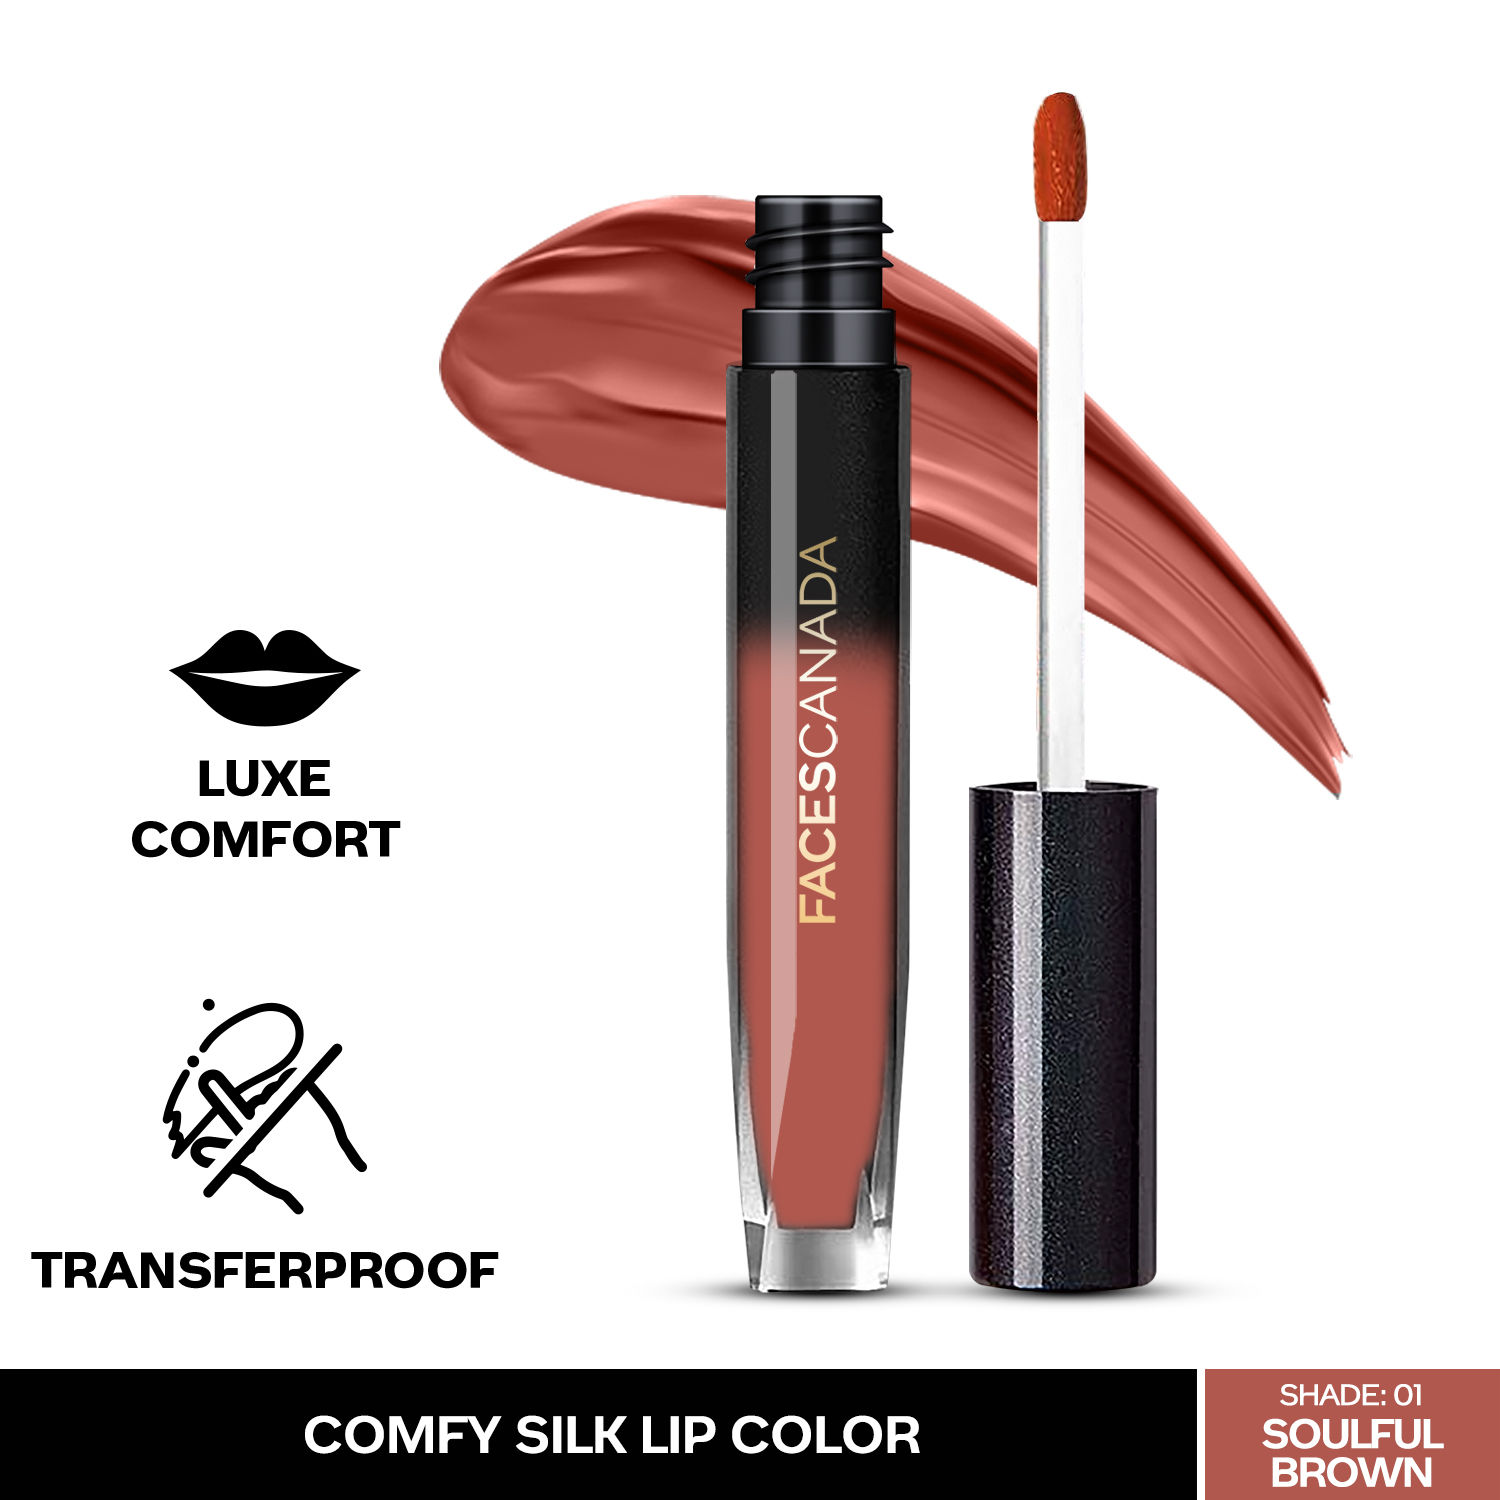 Faces Canada Comfy Silk Lip Color I Satin Matte HD Finish Liquid Lipstick I Mulberry Oil I Luxe Comfort I Longlasting I No Dryness | Alcohol, Paraben & Cruelty Free - Soulful Brown 01 | 3 ml